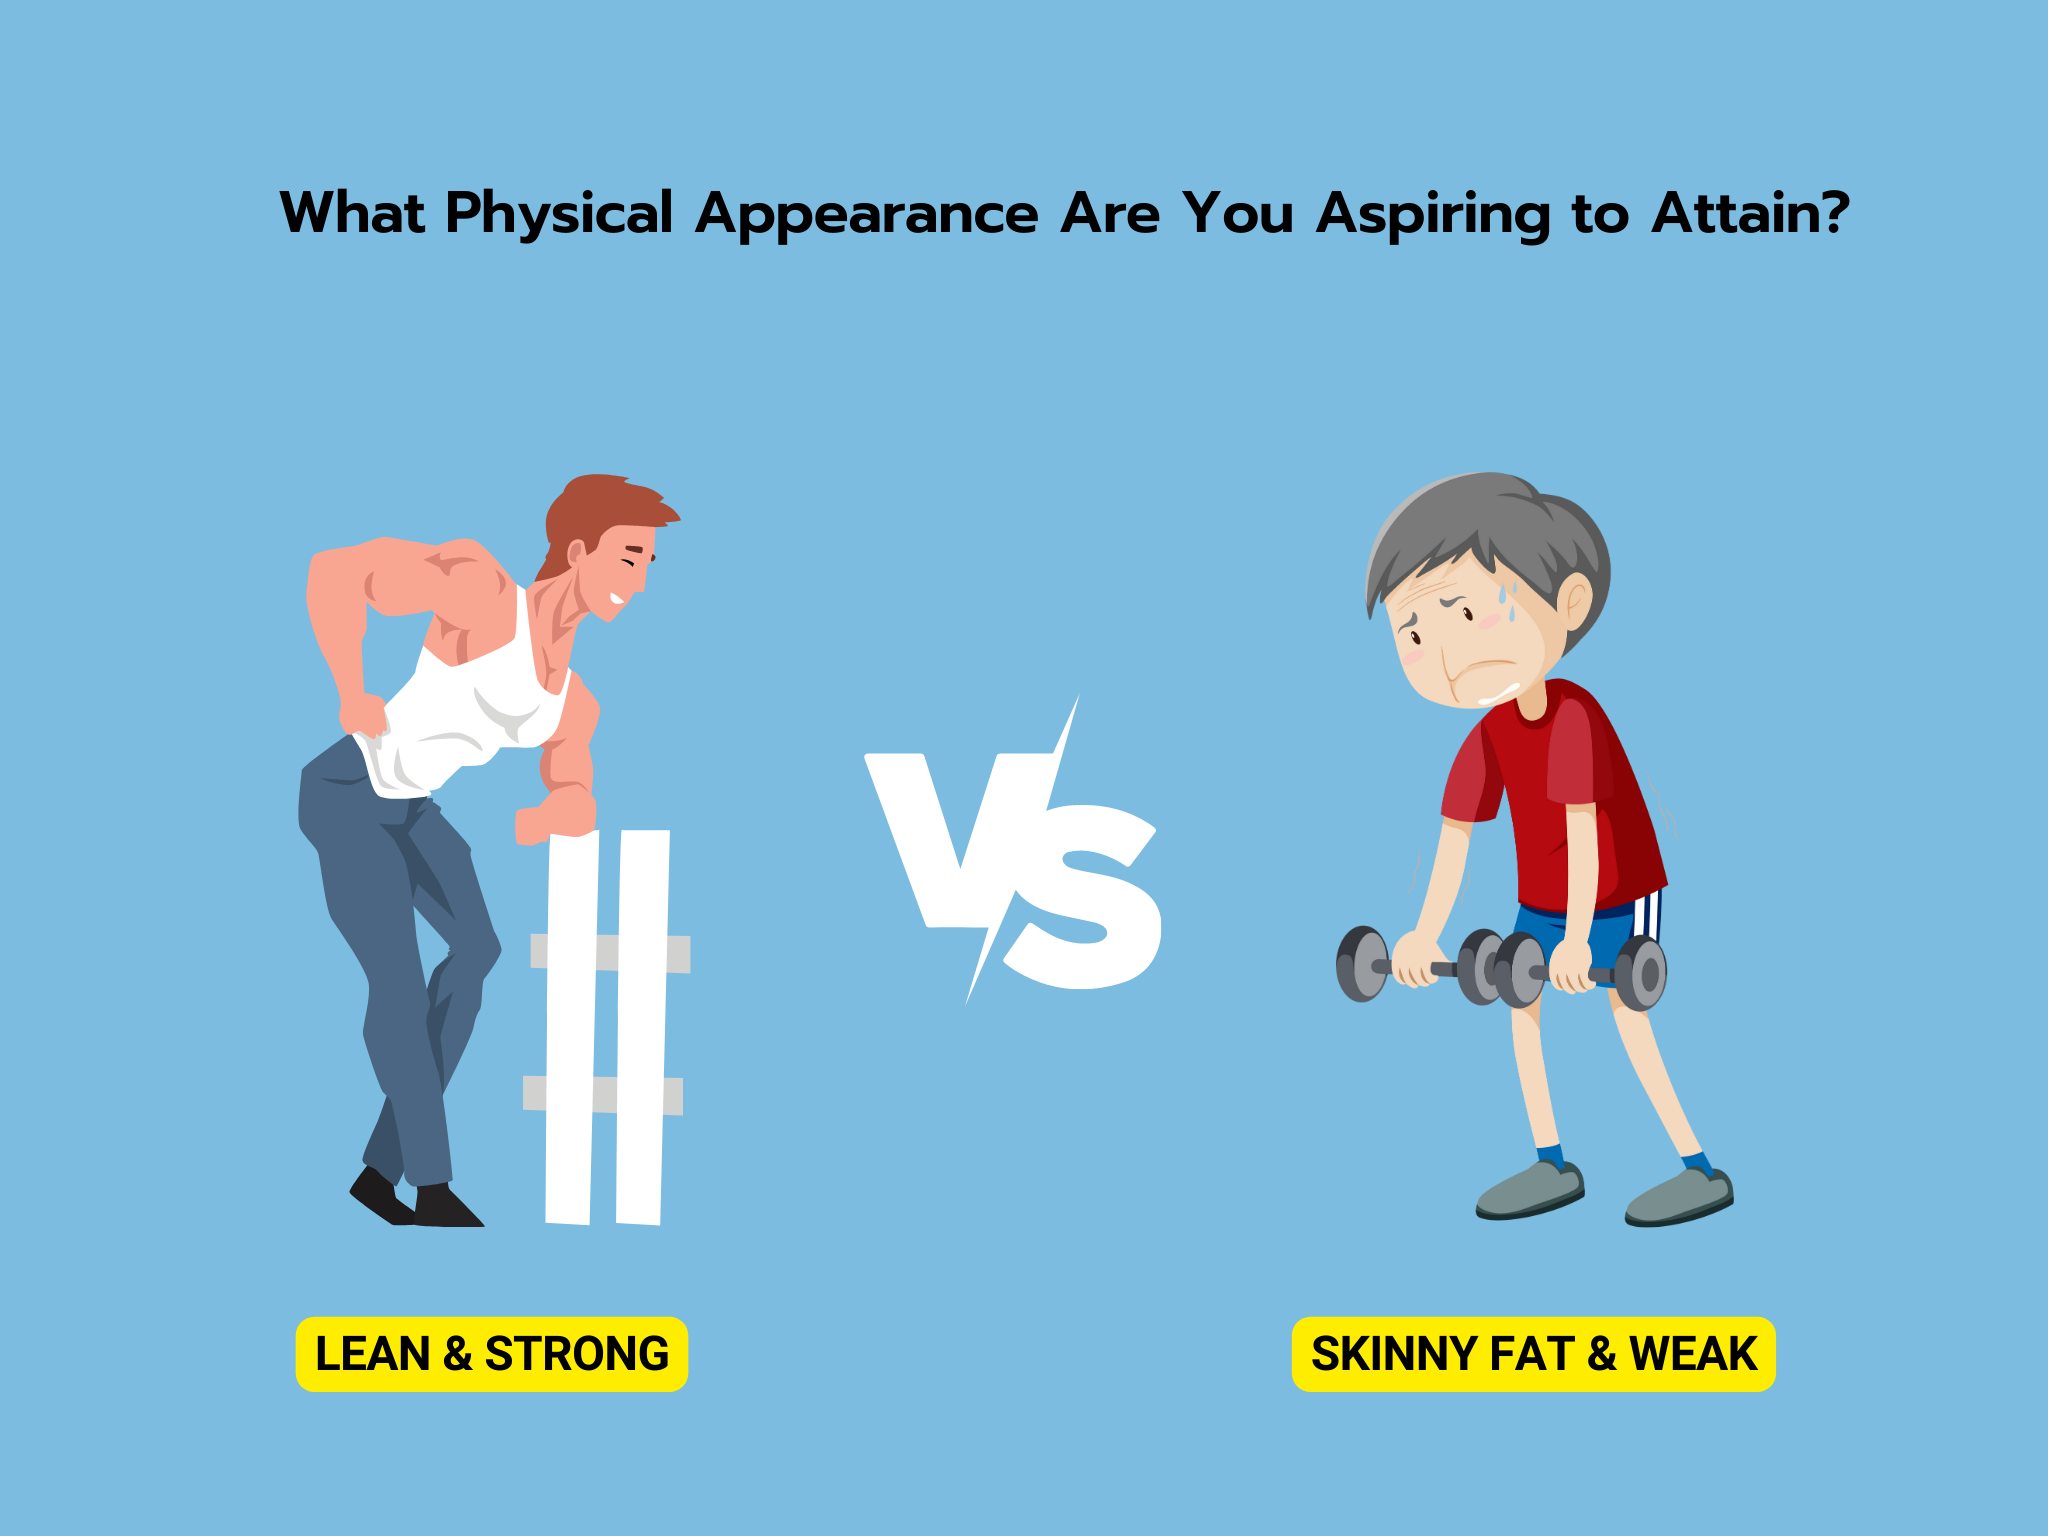 What Physical Appearance Are You Aspiring to Attain